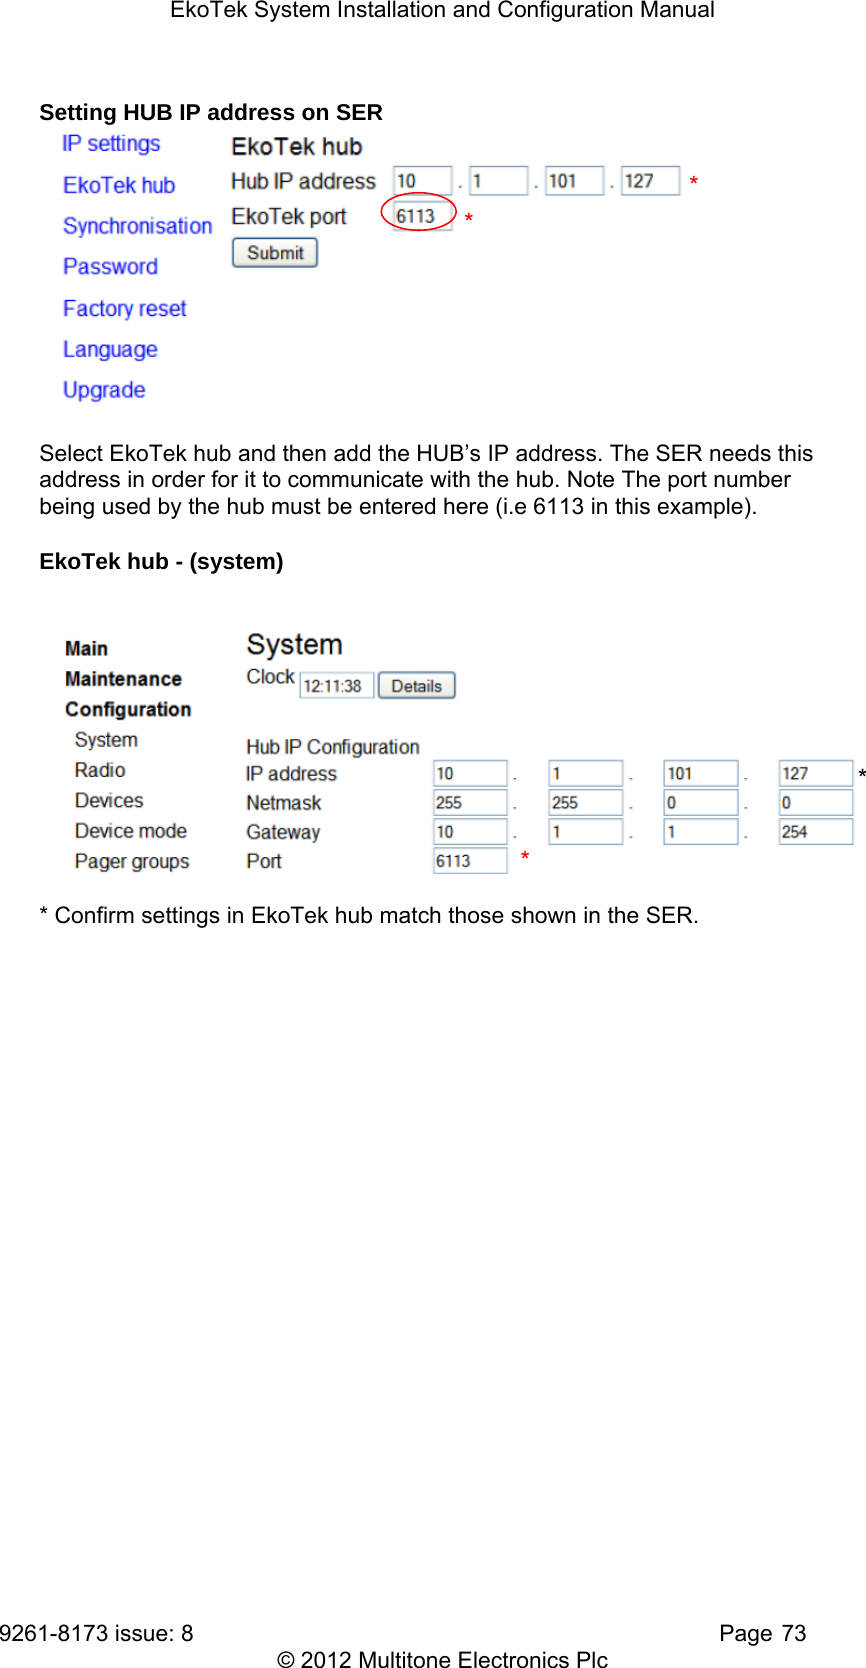 EkoTek System Installation and Configuration Manual 9261-8173 issue: 8   Page 73 © 2012 Multitone Electronics Plc Setting HUB IP address on SER  Select EkoTek hub and then add the HUB’s IP address. The SER needs this address in order for it to communicate with the hub. Note The port number being used by the hub must be entered here (i.e 6113 in this example). EkoTek hub - (system)   * Confirm settings in EkoTek hub match those shown in the SER.  * ***